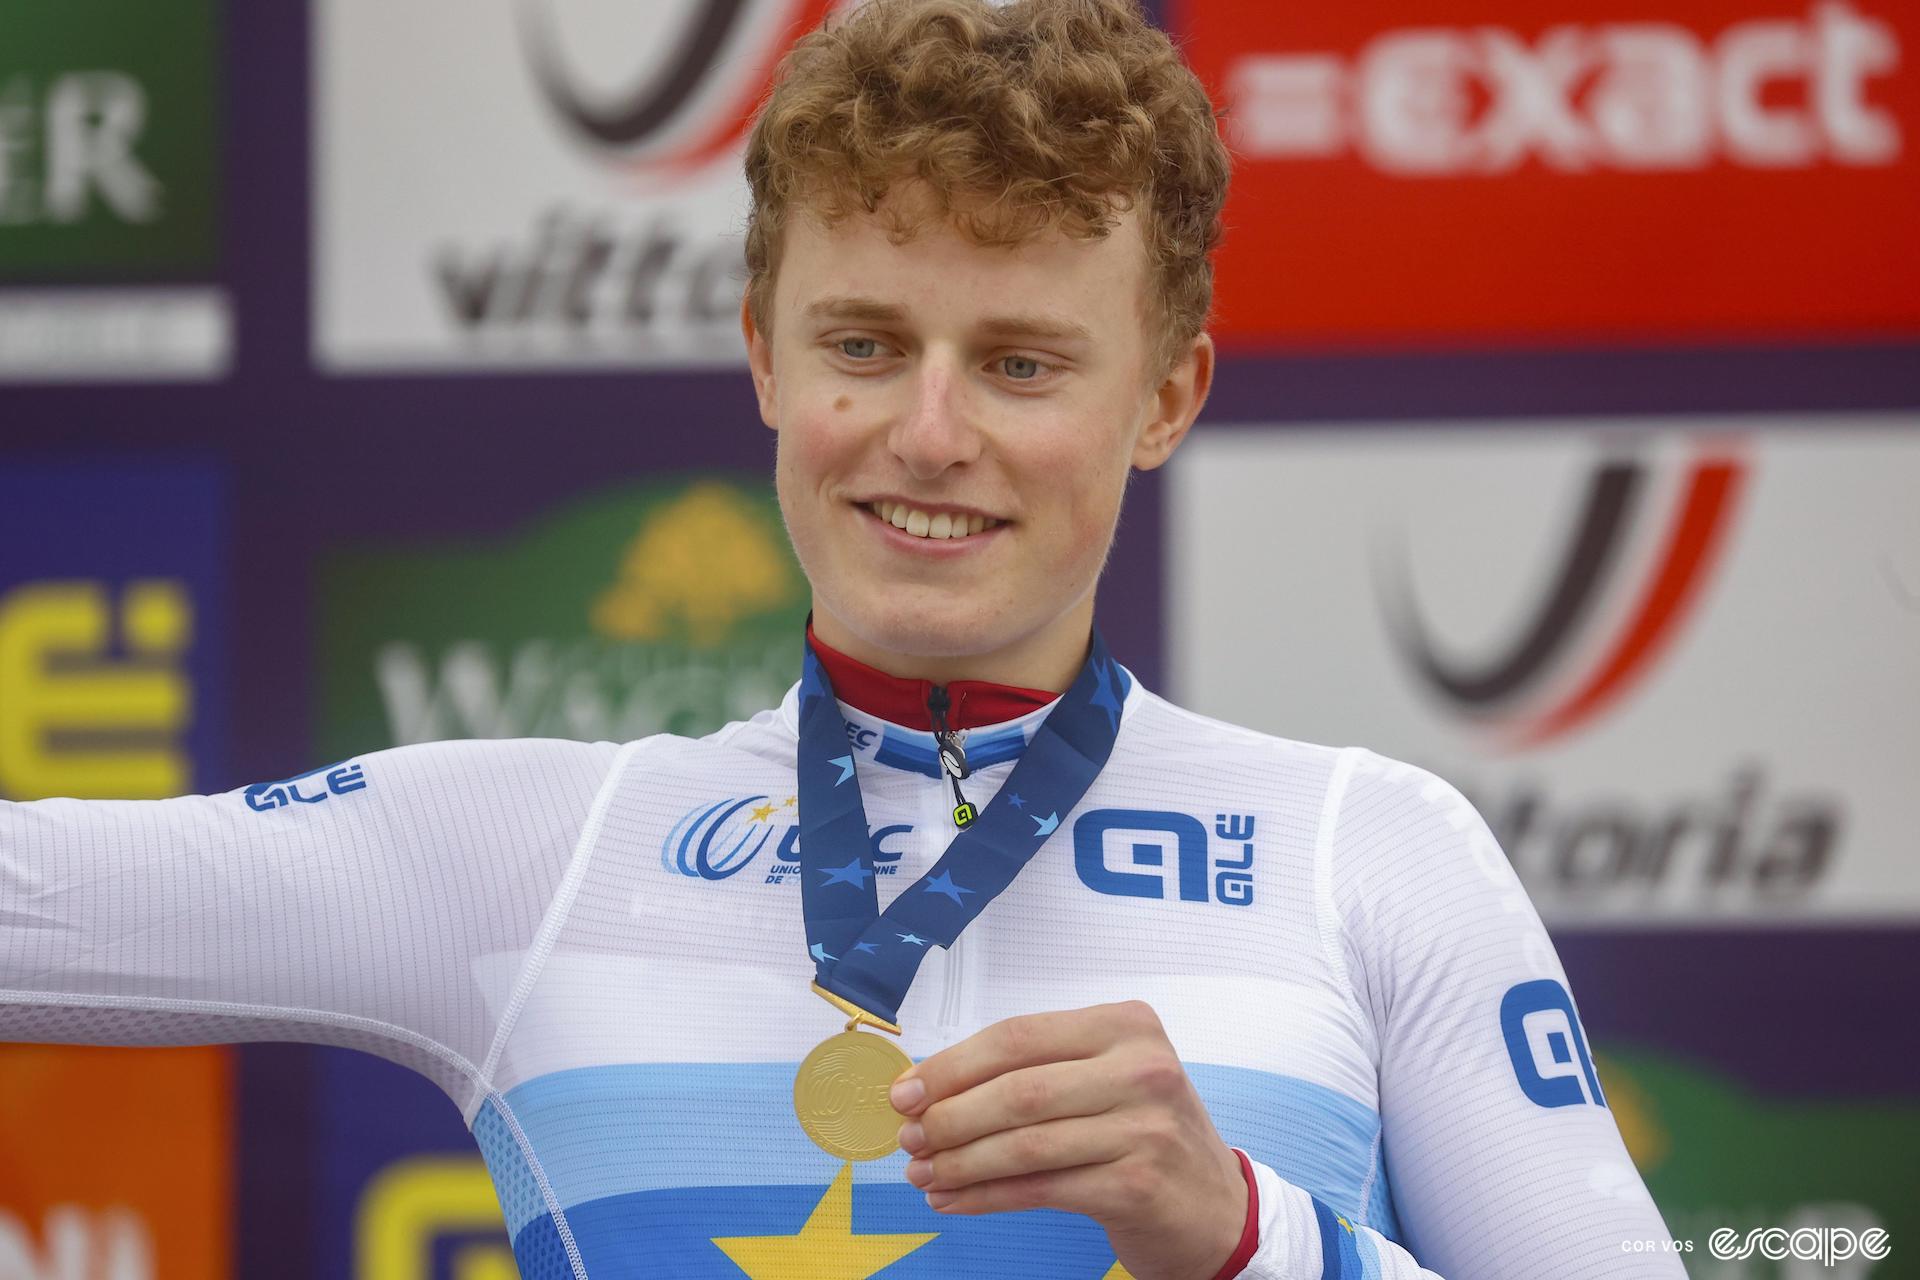 A cyclist in the white and blue jersey of European champion stands on a podium, holding a gold medal that's strung around his neck with a blue strap.